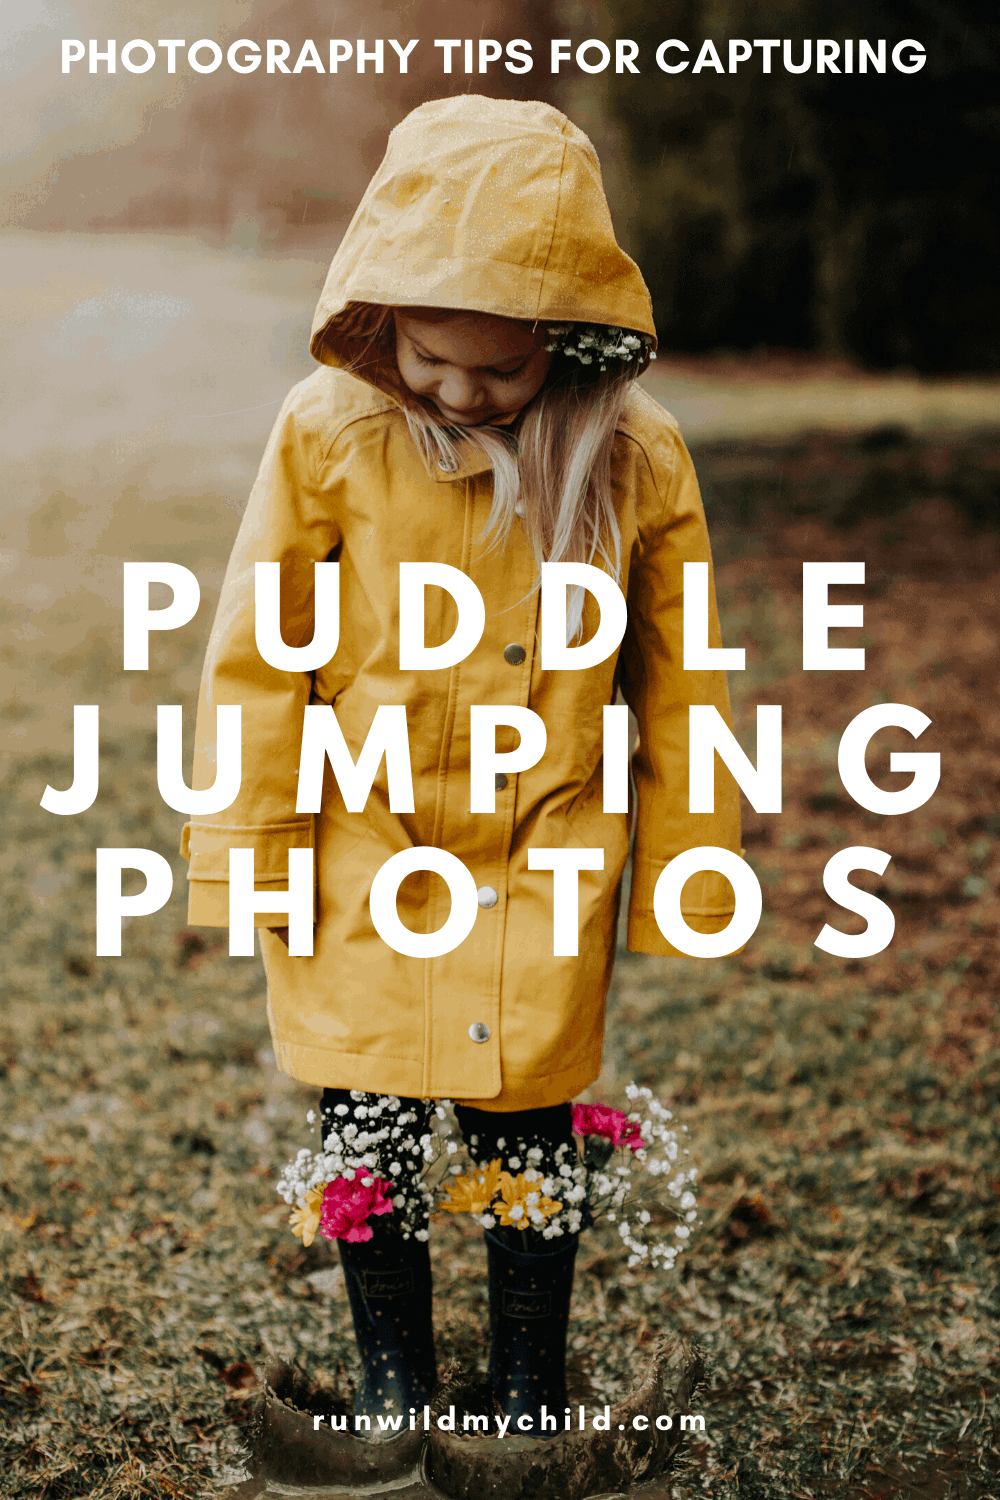 photography tips for capturing puddle jumping pictures of kids